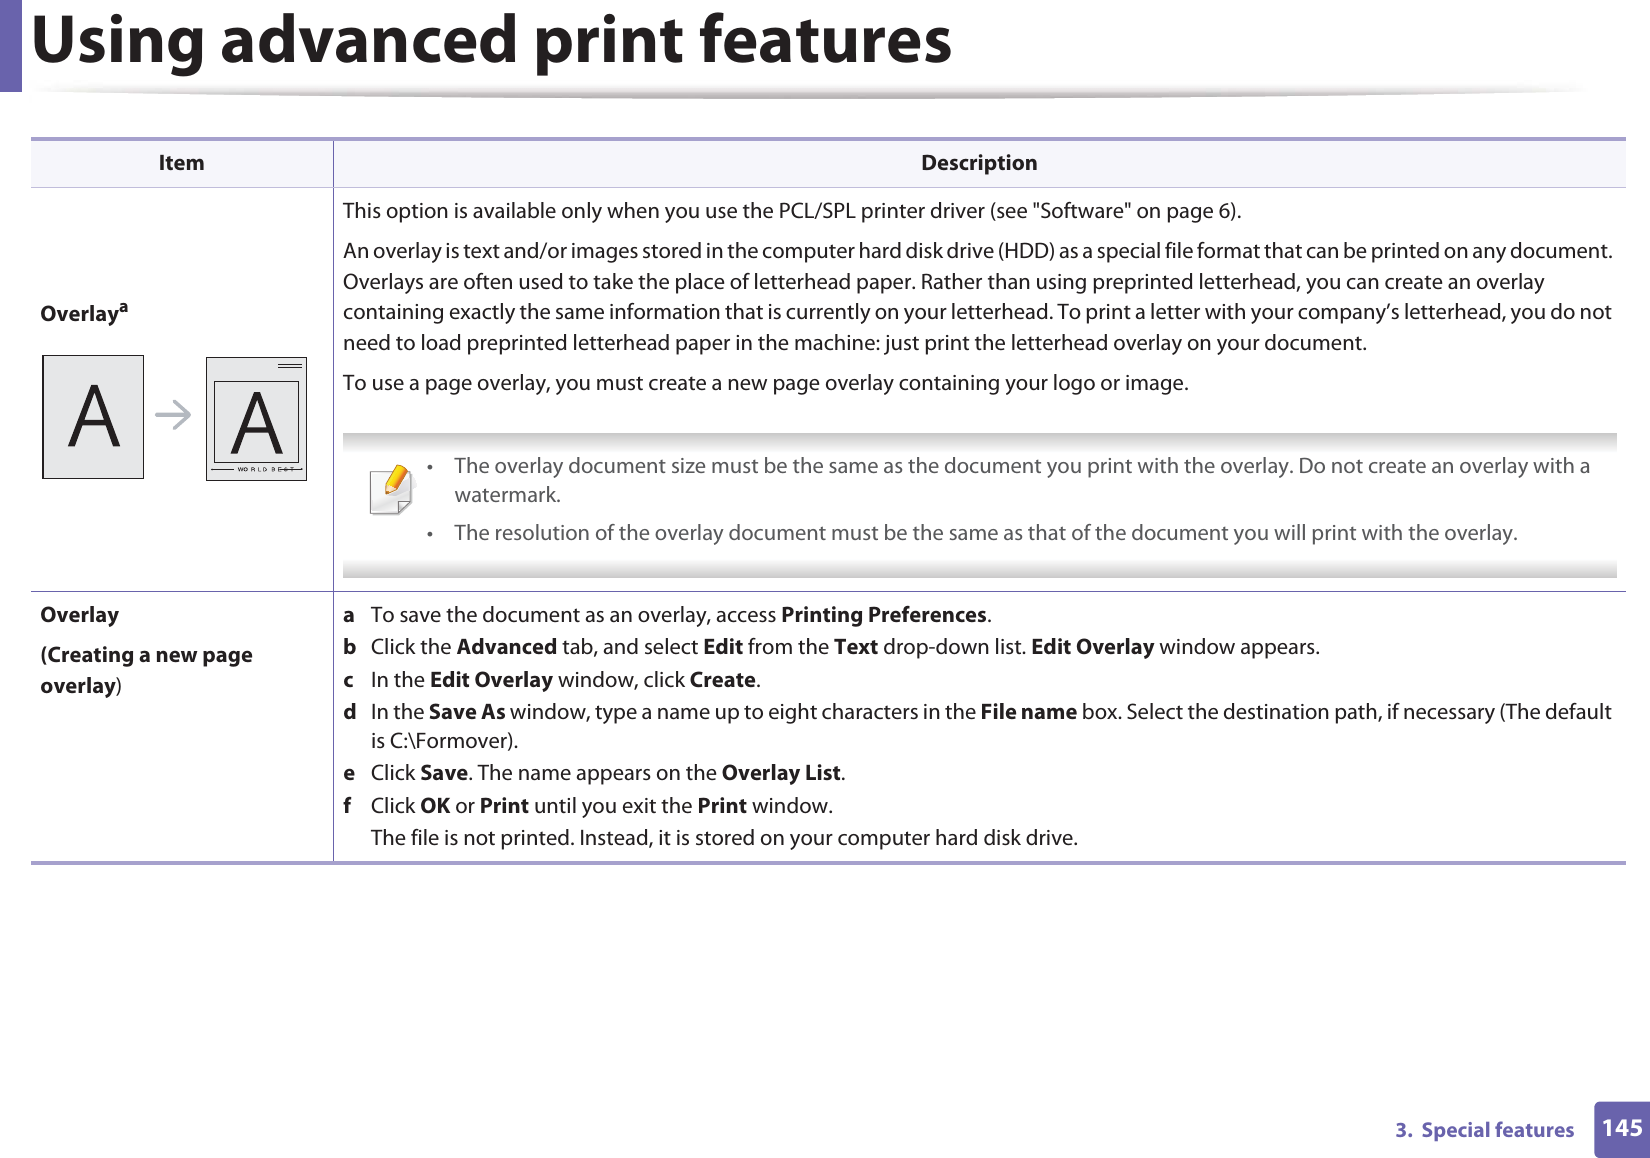 Using advanced print features1453.  Special featuresOverlayaThis option is available only when you use the PCL/SPL printer driver (see &quot;Software&quot; on page 6).An overlay is text and/or images stored in the computer hard disk drive (HDD) as a special file format that can be printed on any document. Overlays are often used to take the place of letterhead paper. Rather than using preprinted letterhead, you can create an overlay containing exactly the same information that is currently on your letterhead. To print a letter with your company’s letterhead, you do not need to load preprinted letterhead paper in the machine: just print the letterhead overlay on your document.To use a page overlay, you must create a new page overlay containing your logo or image. • The overlay document size must be the same as the document you print with the overlay. Do not create an overlay with a watermark.• The resolution of the overlay document must be the same as that of the document you will print with the overlay. Overlay(Creating a new page overlay)a  To save the document as an overlay, access Printing Preferences.b  Click the Advanced tab, and select Edit from the Text drop-down list. Edit Overlay window appears.c  In the Edit Overlay window, click Create. d  In the Save As window, type a name up to eight characters in the File name box. Select the destination path, if necessary (The default is C:\Formover).e  Click Save. The name appears on the Overlay List. f  Click OK or Print until you exit the Print window.The file is not printed. Instead, it is stored on your computer hard disk drive.Item Description